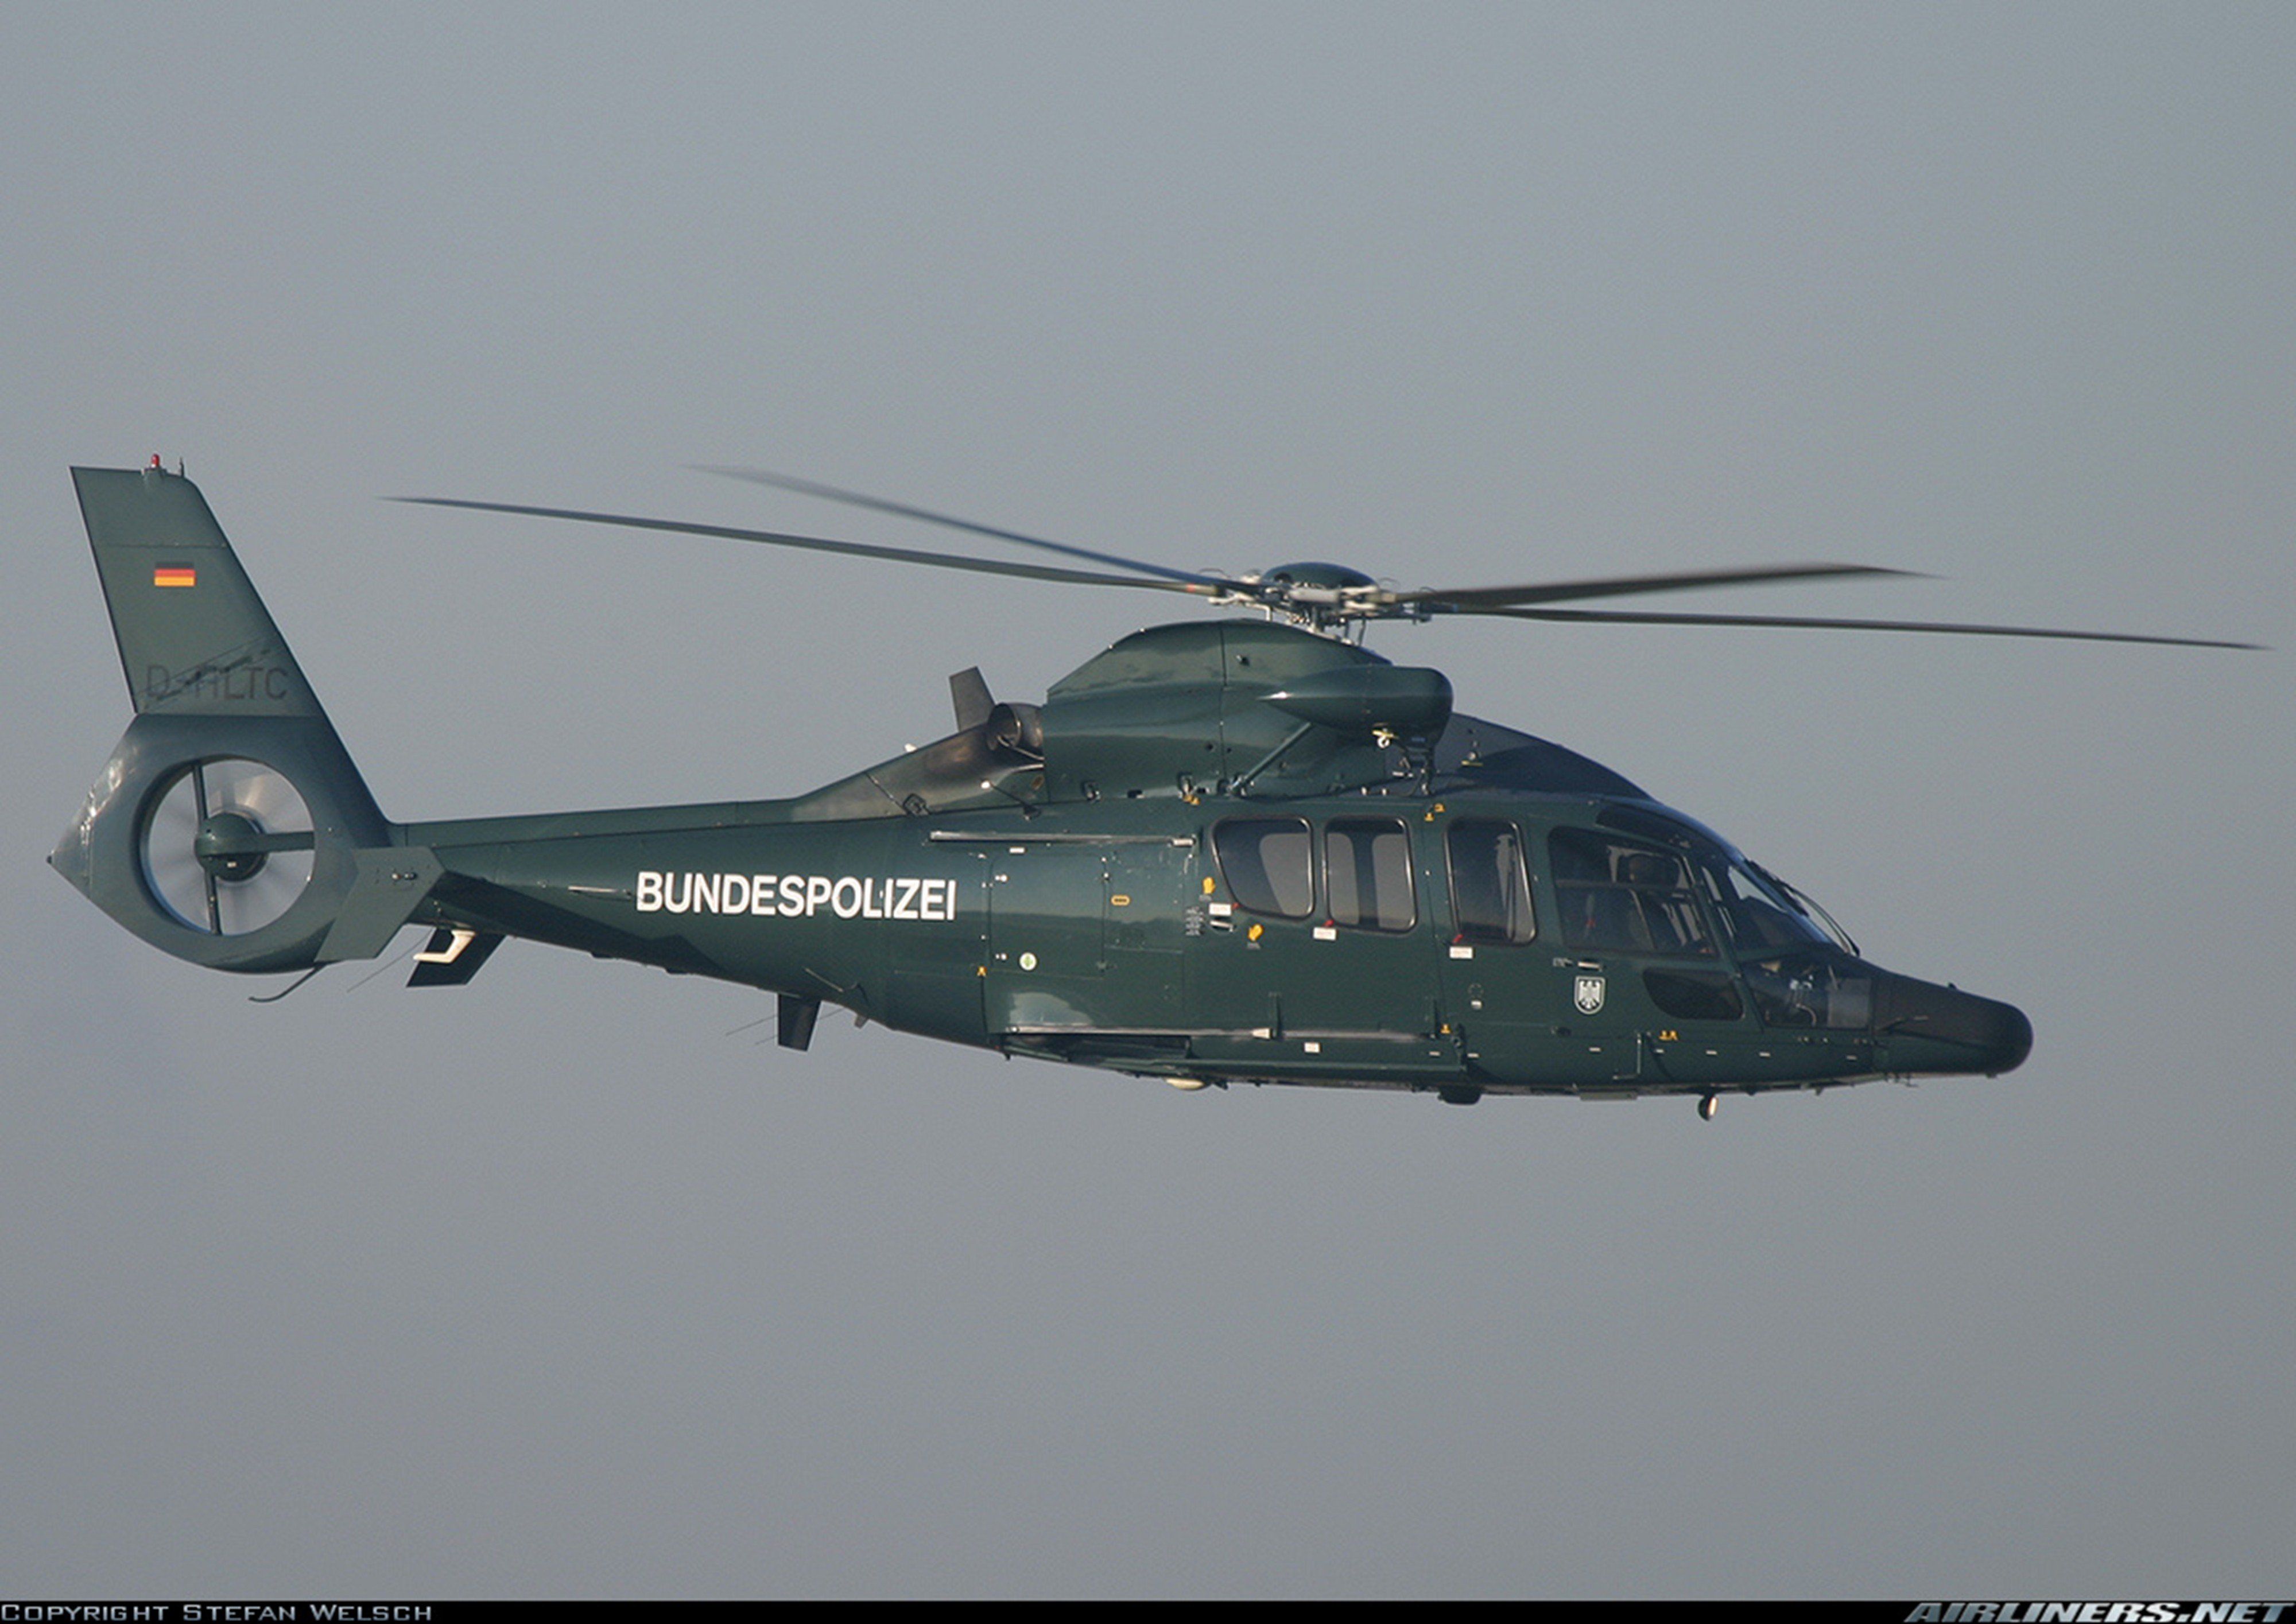 helicopter, Aircraft, Federal, Police, Bundspolizei, Germany